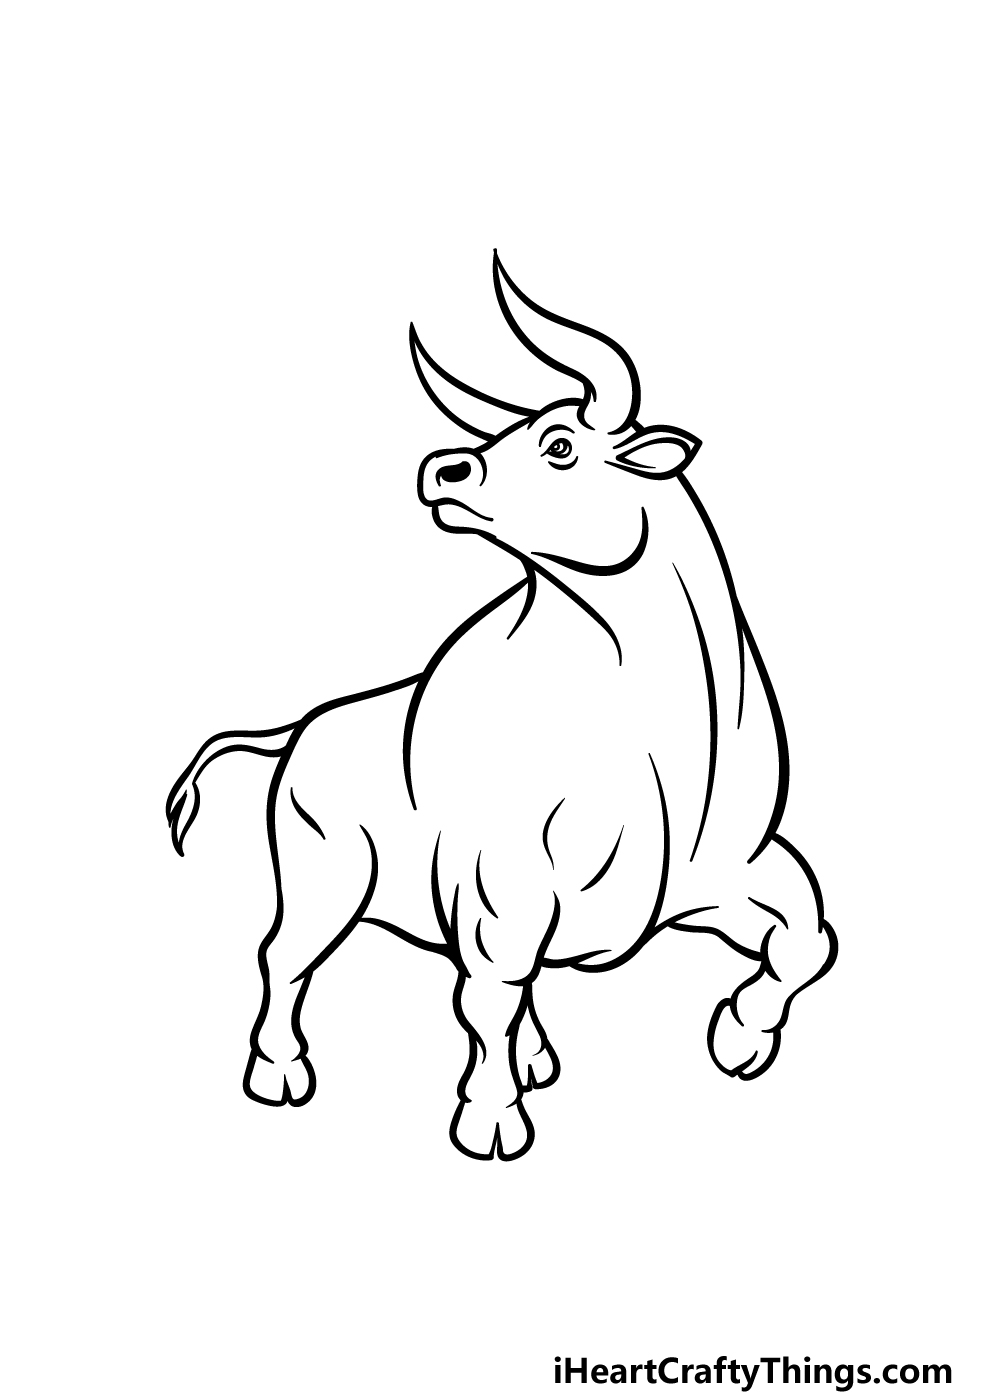 Discover 86+ ox picture drawing latest